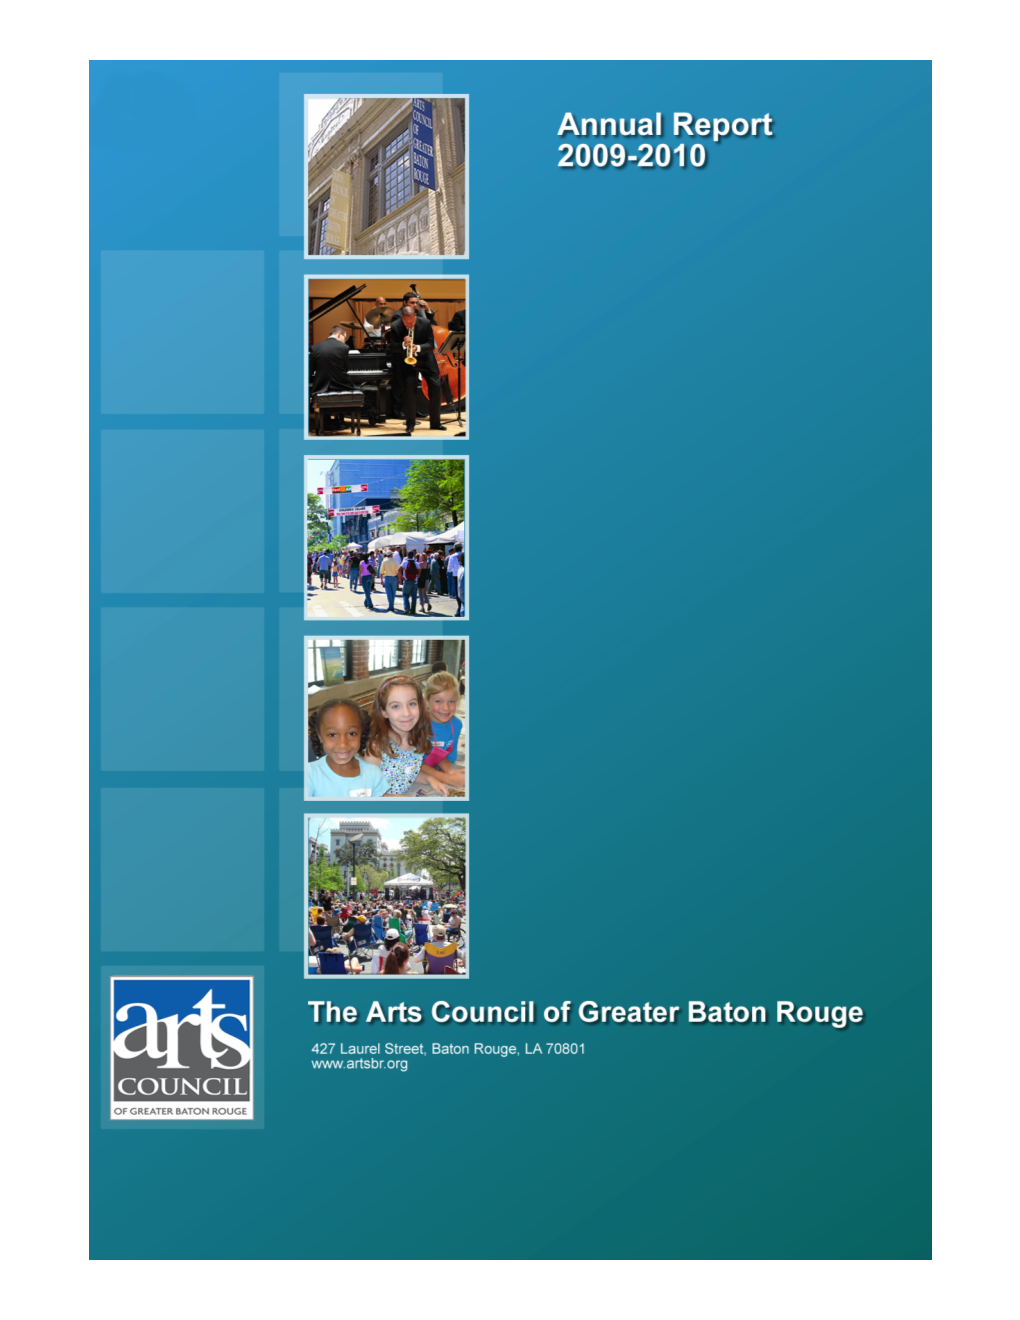 The Arts Council of Greater Baton Rouge Annual Report 2009-2010